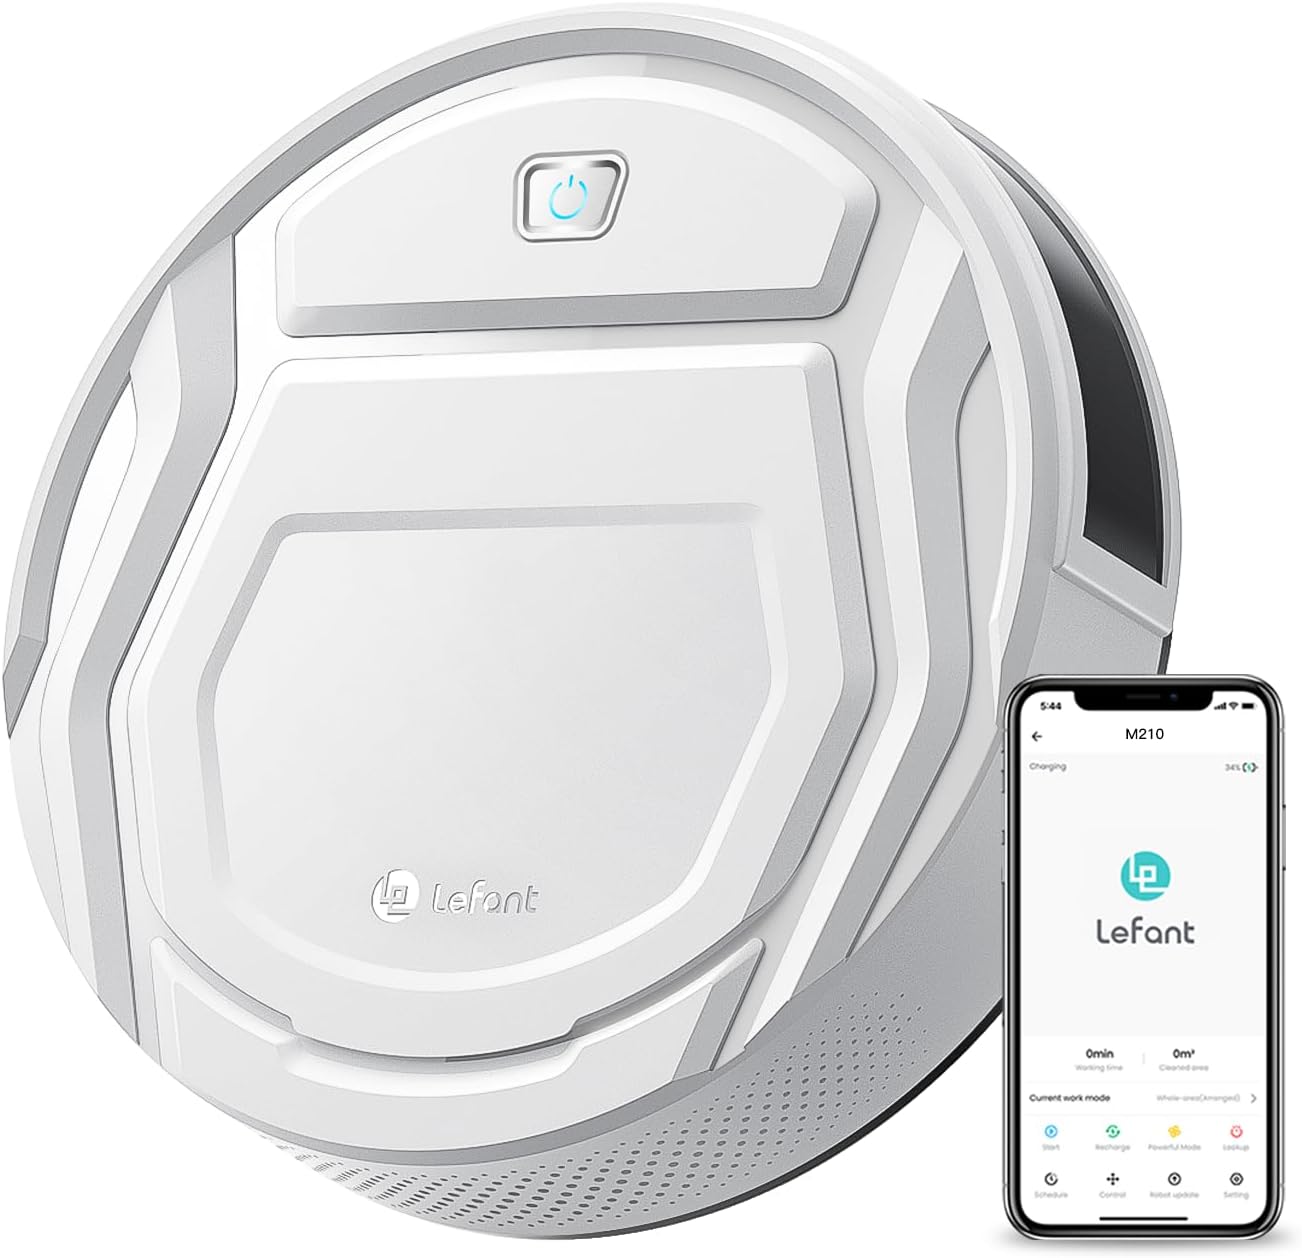 Lefant Robot Vacuum Drops Price by Almost $200 on Amazon: Here's What You Get from the Advanced Robot